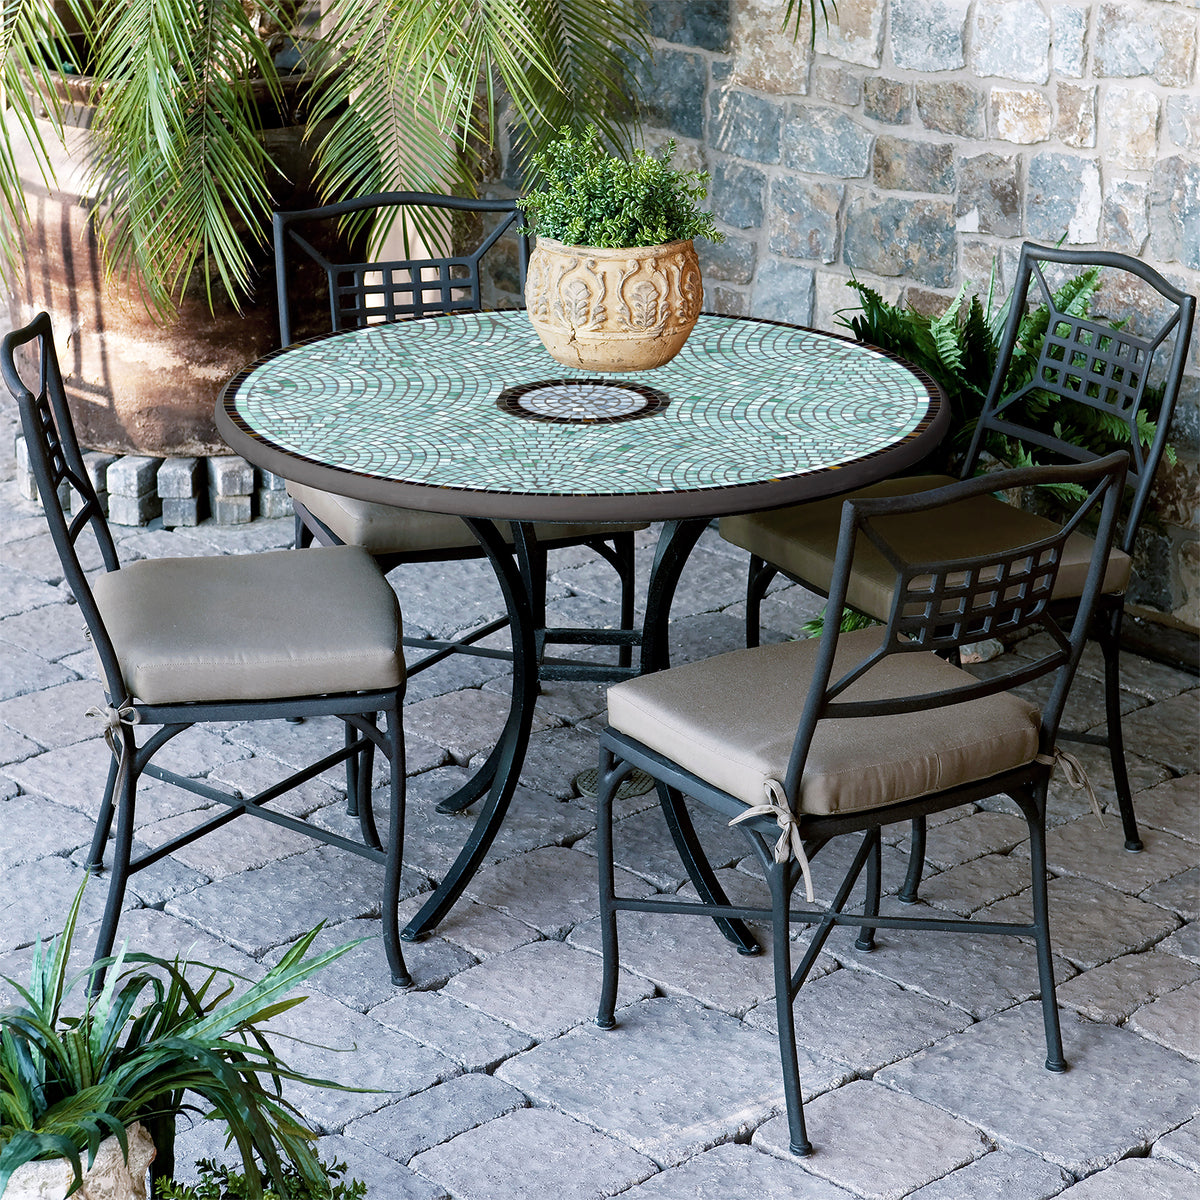 Jade Glass Mosaic Patio Table-Iron Accents